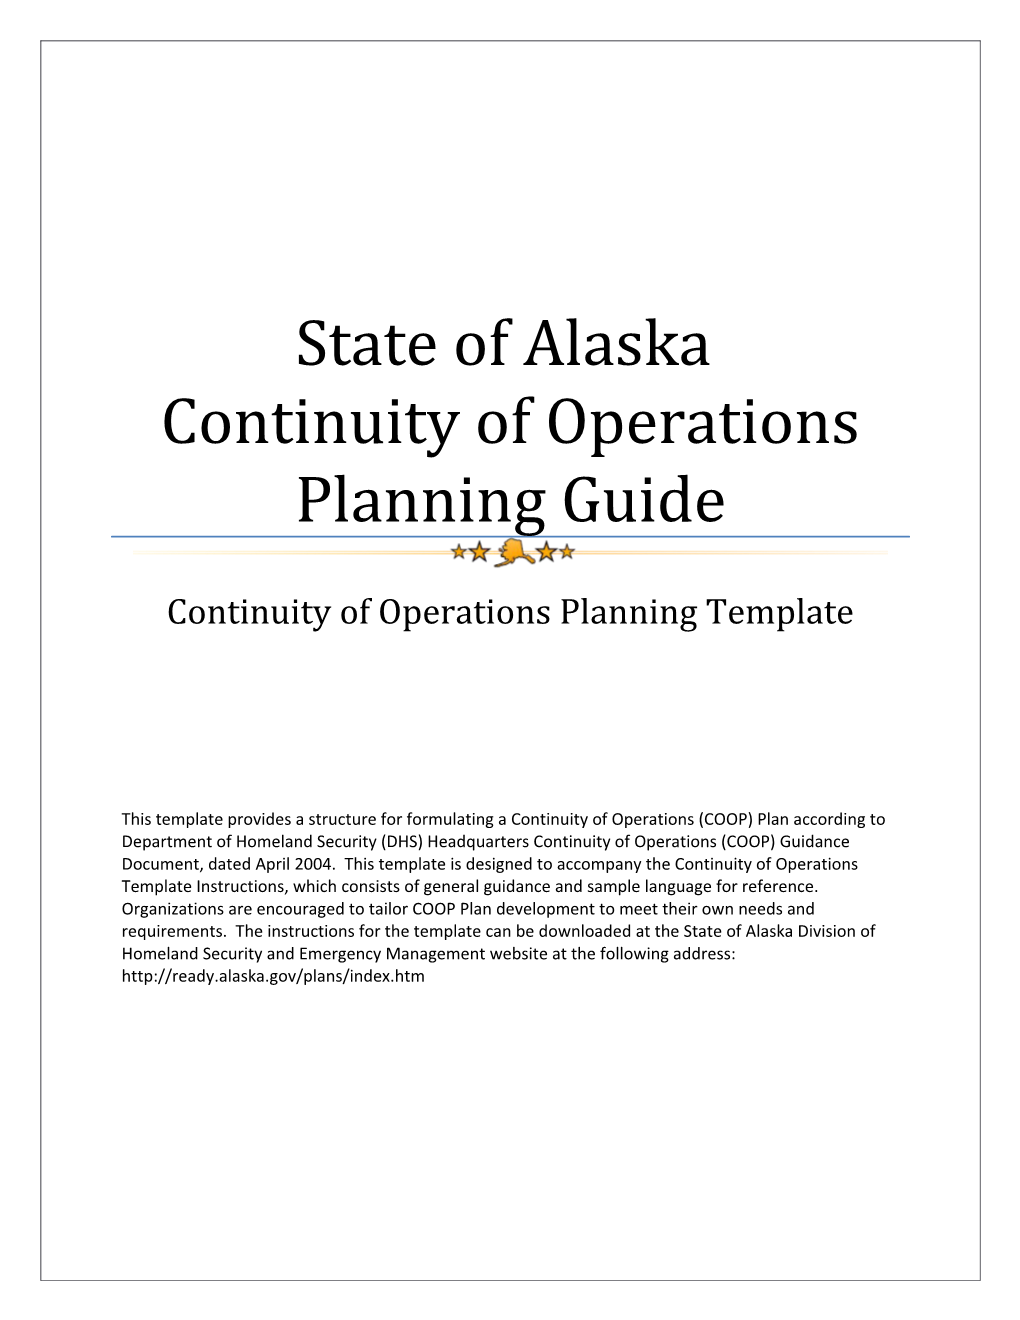 State of Alaska Continuity of Operations Planning Guide